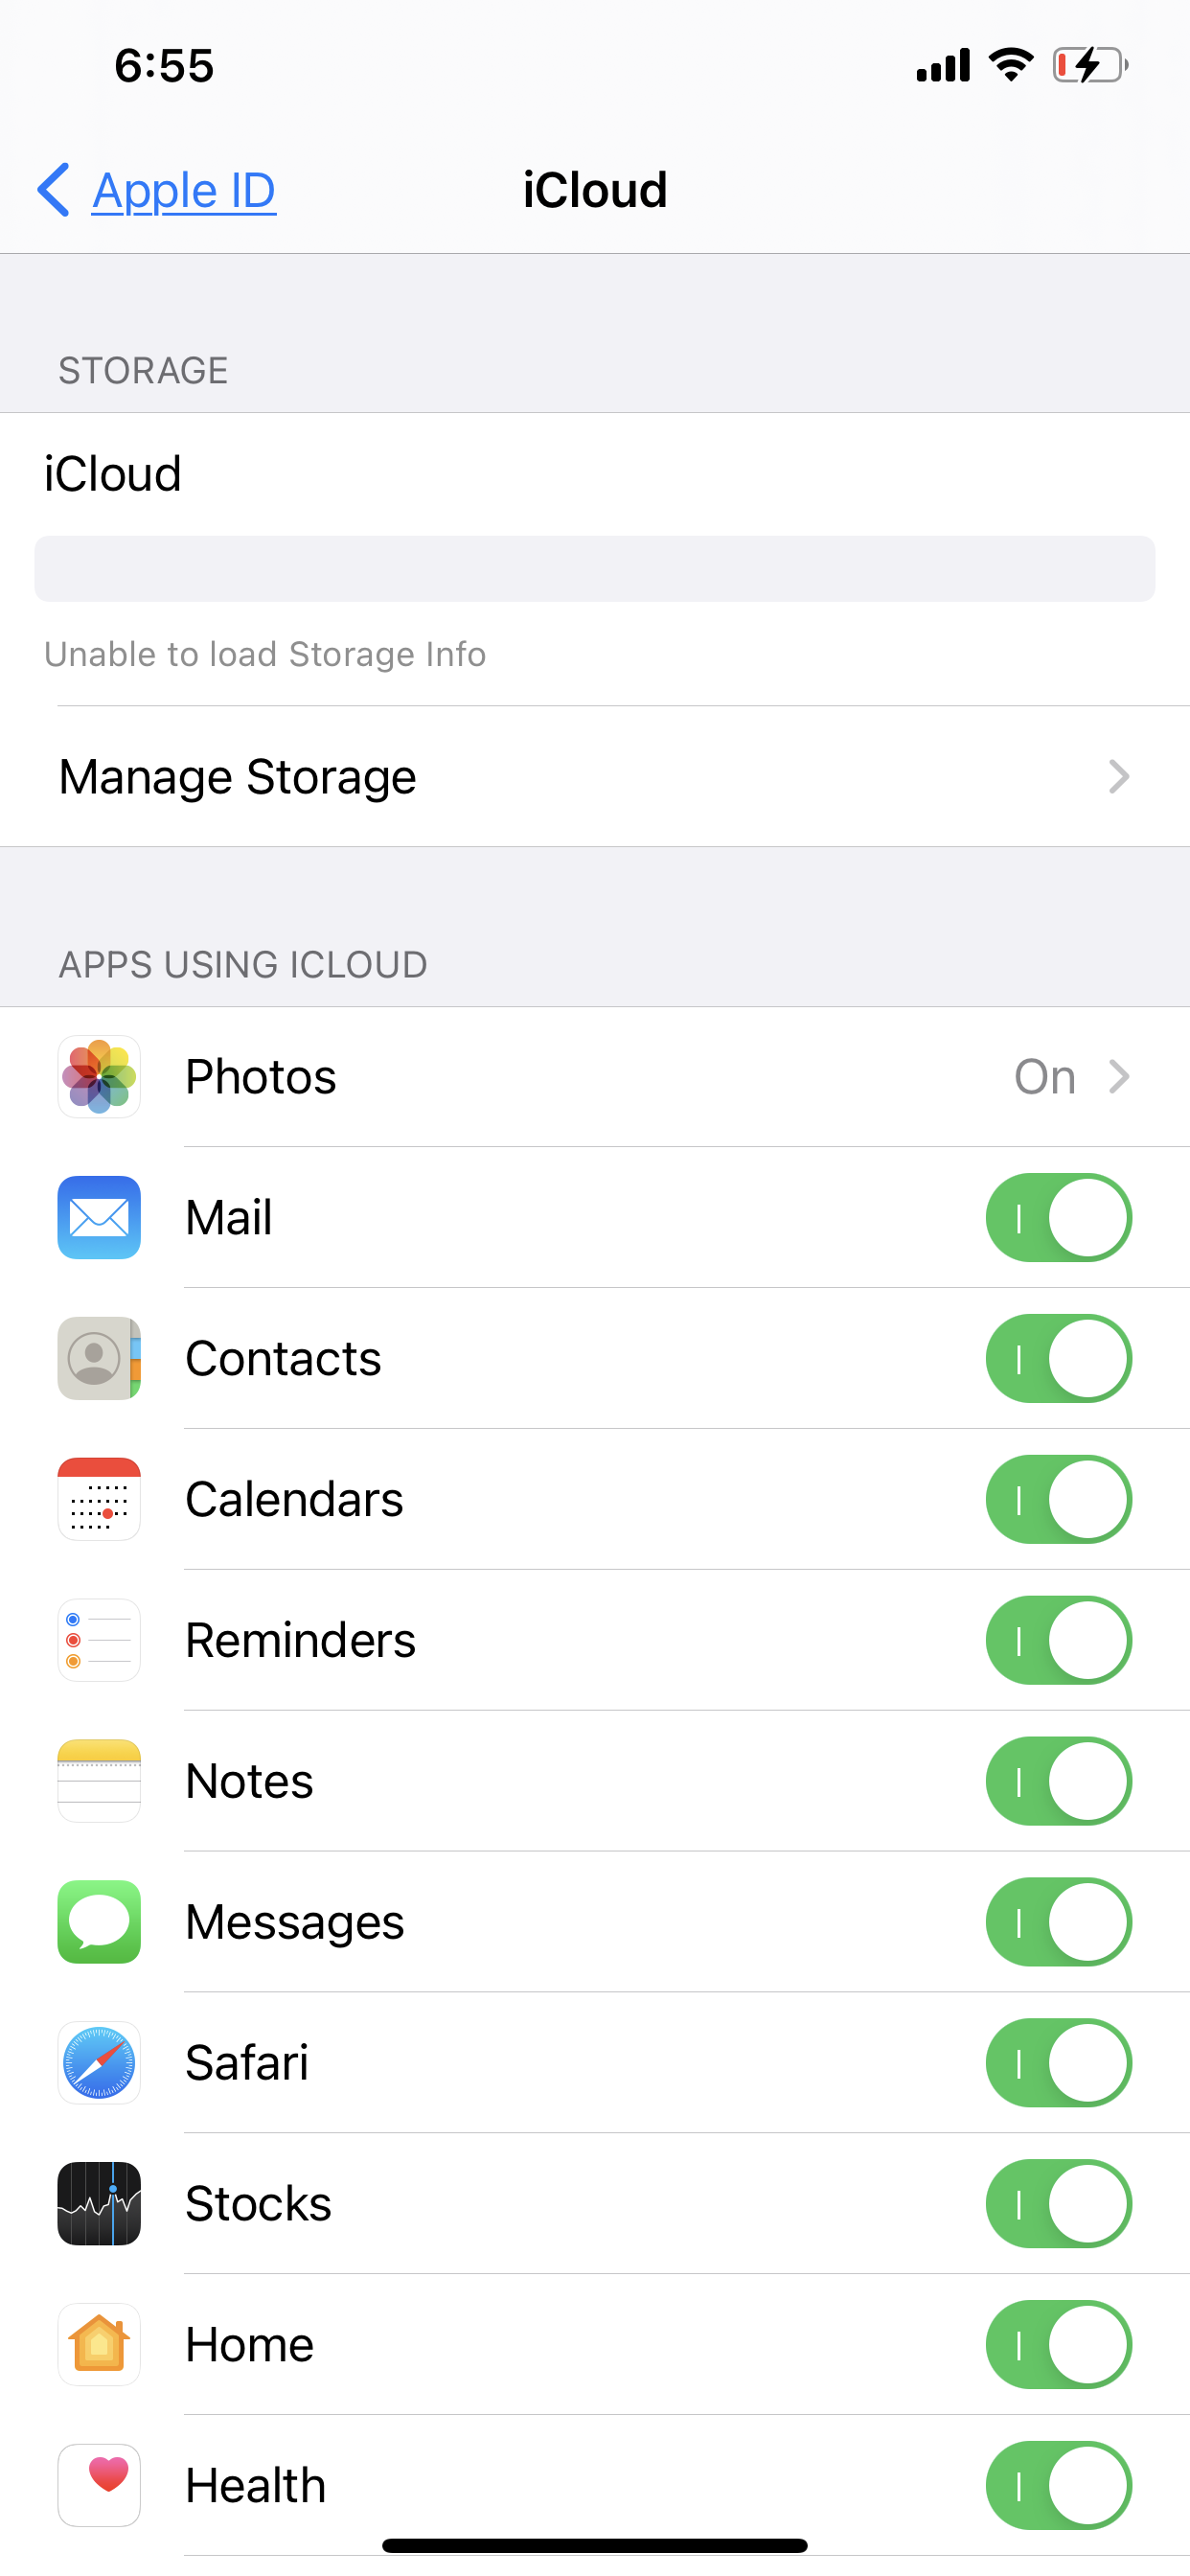 can i buy more storage for my iphone